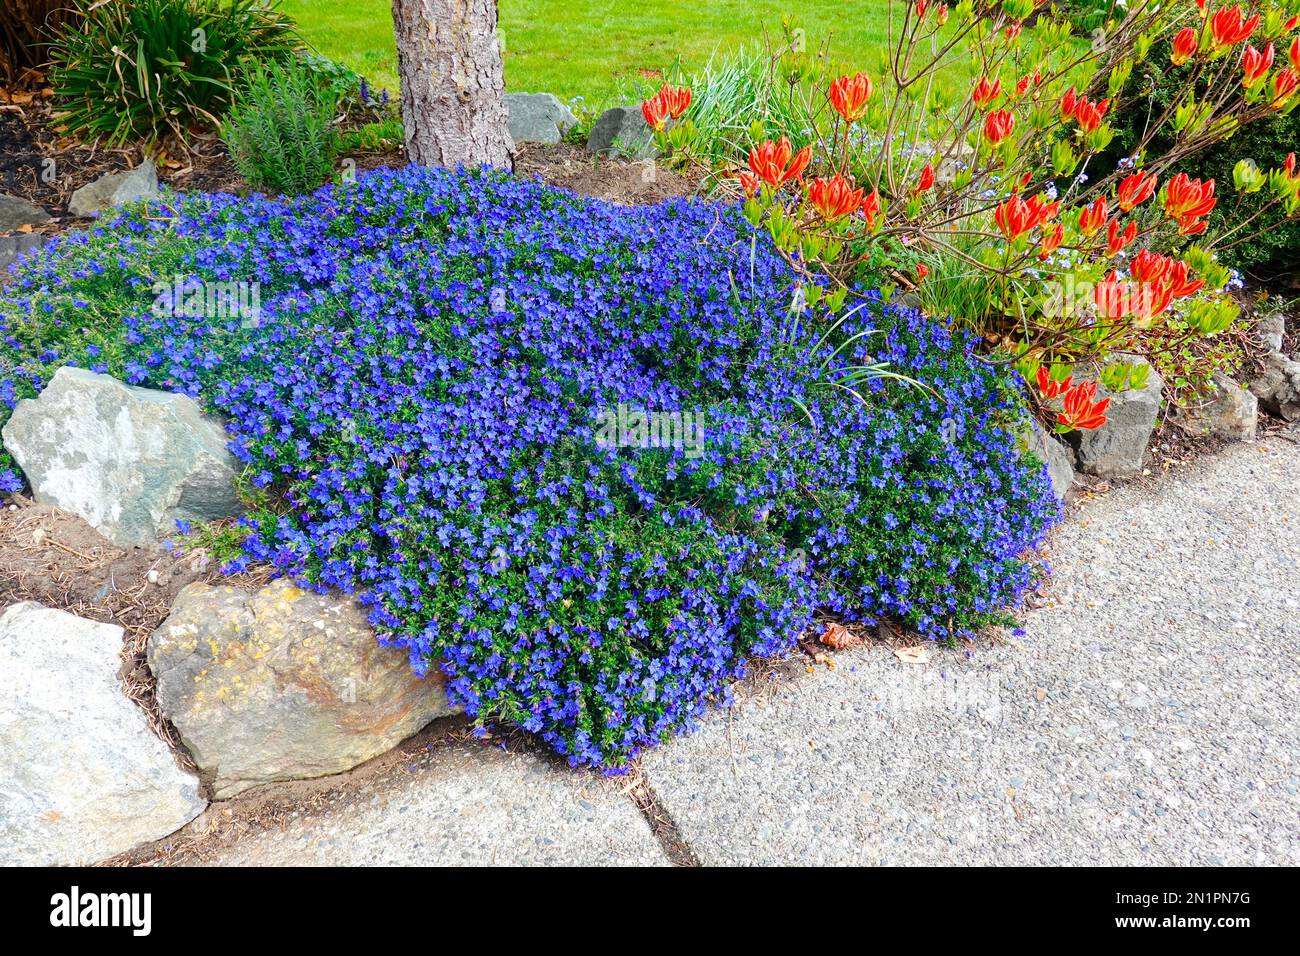 Lithodora (Lithodora diffusa) - a sprawling evergreen ground cover with masses of blue star-shaped flowers. Stock Photo